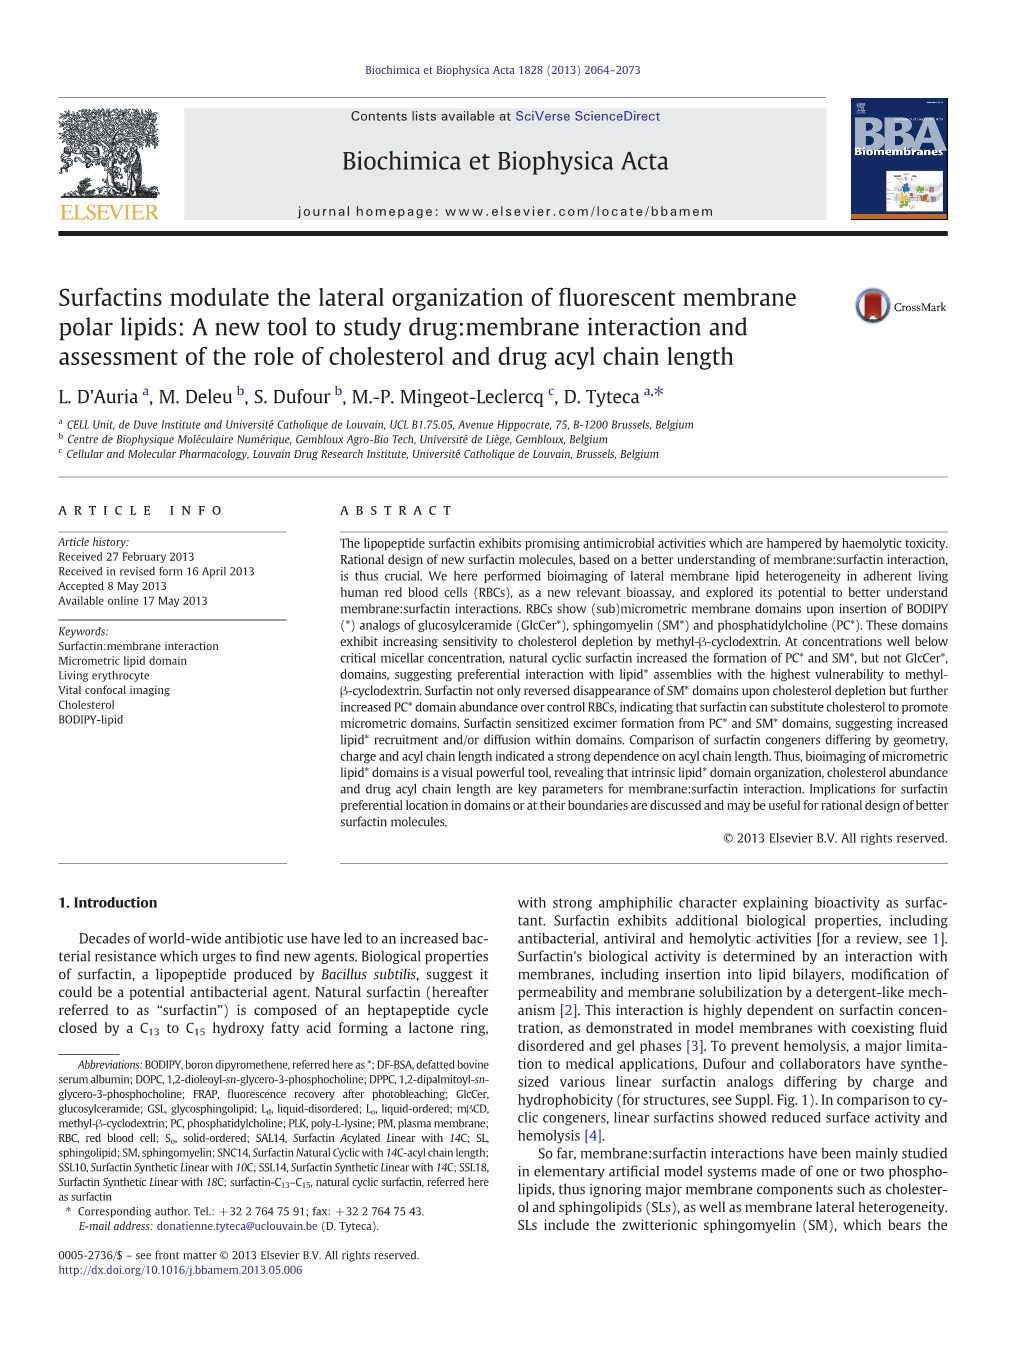 A New Tool to Study Drug:Membrane Interaction and Assessment of the Role of Cholesterol and Drug Acyl Chain Length